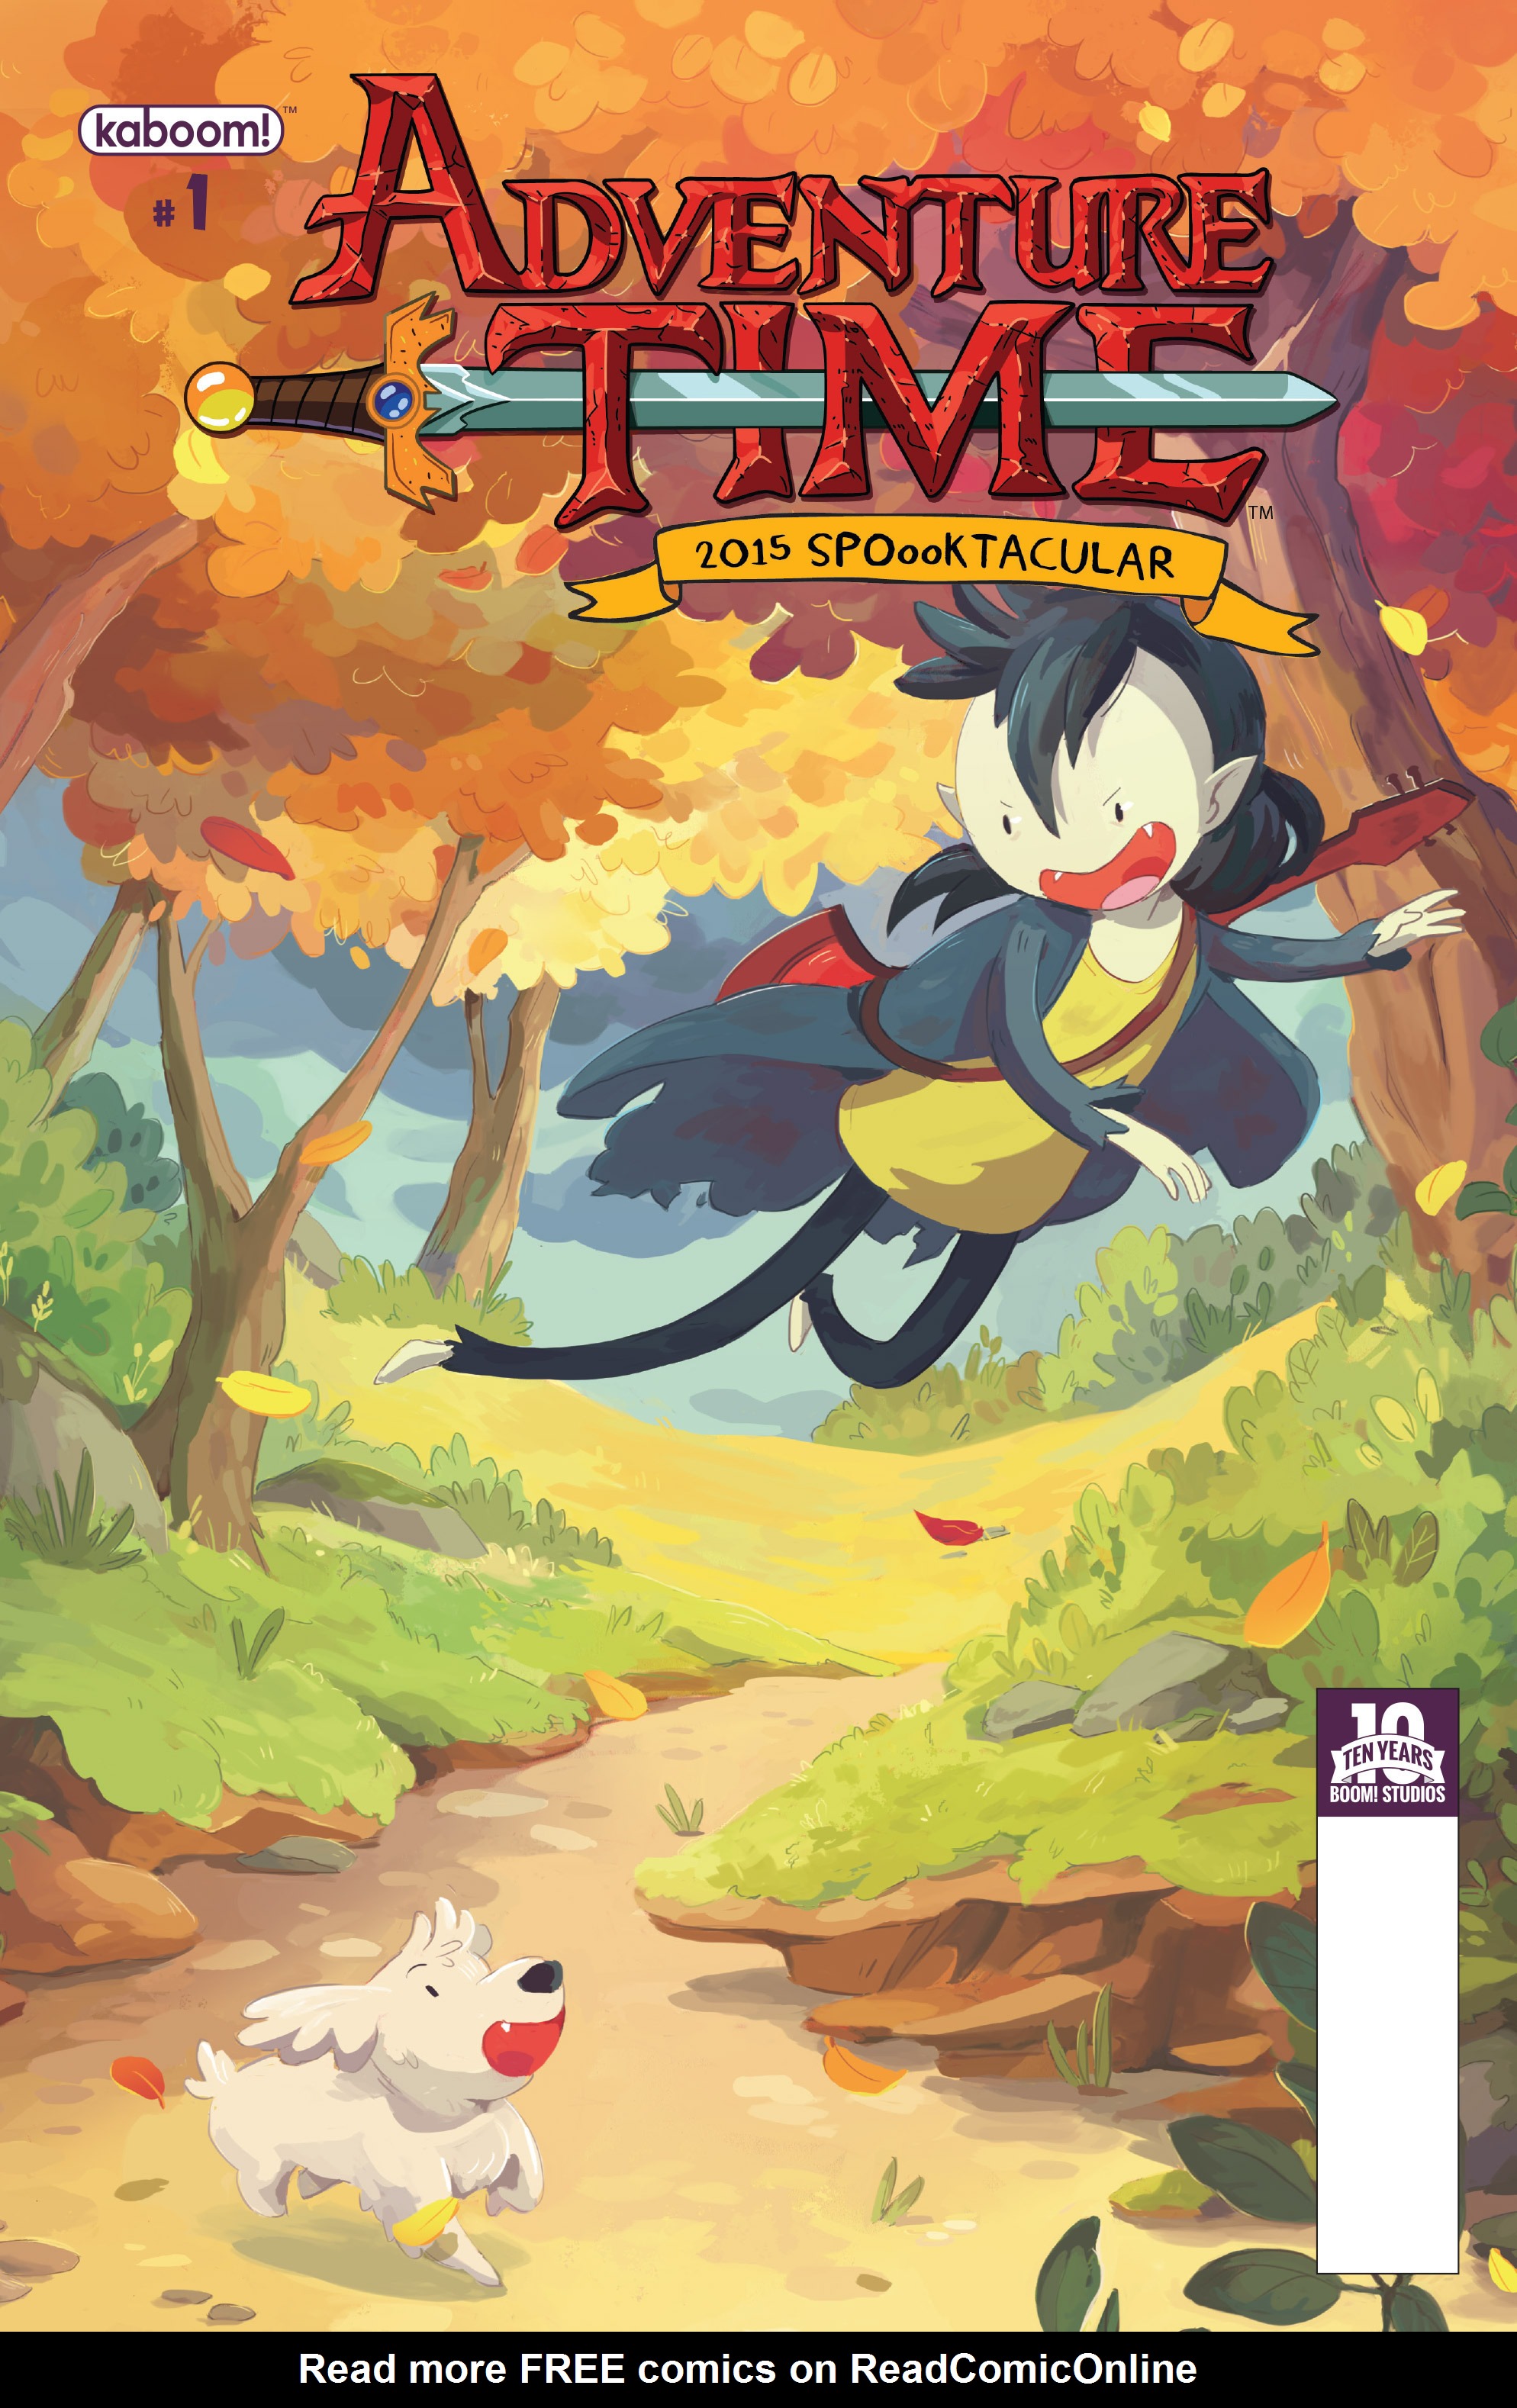 Read online Adventure Time comic -  Issue # _2015 Spoooktacular - 1